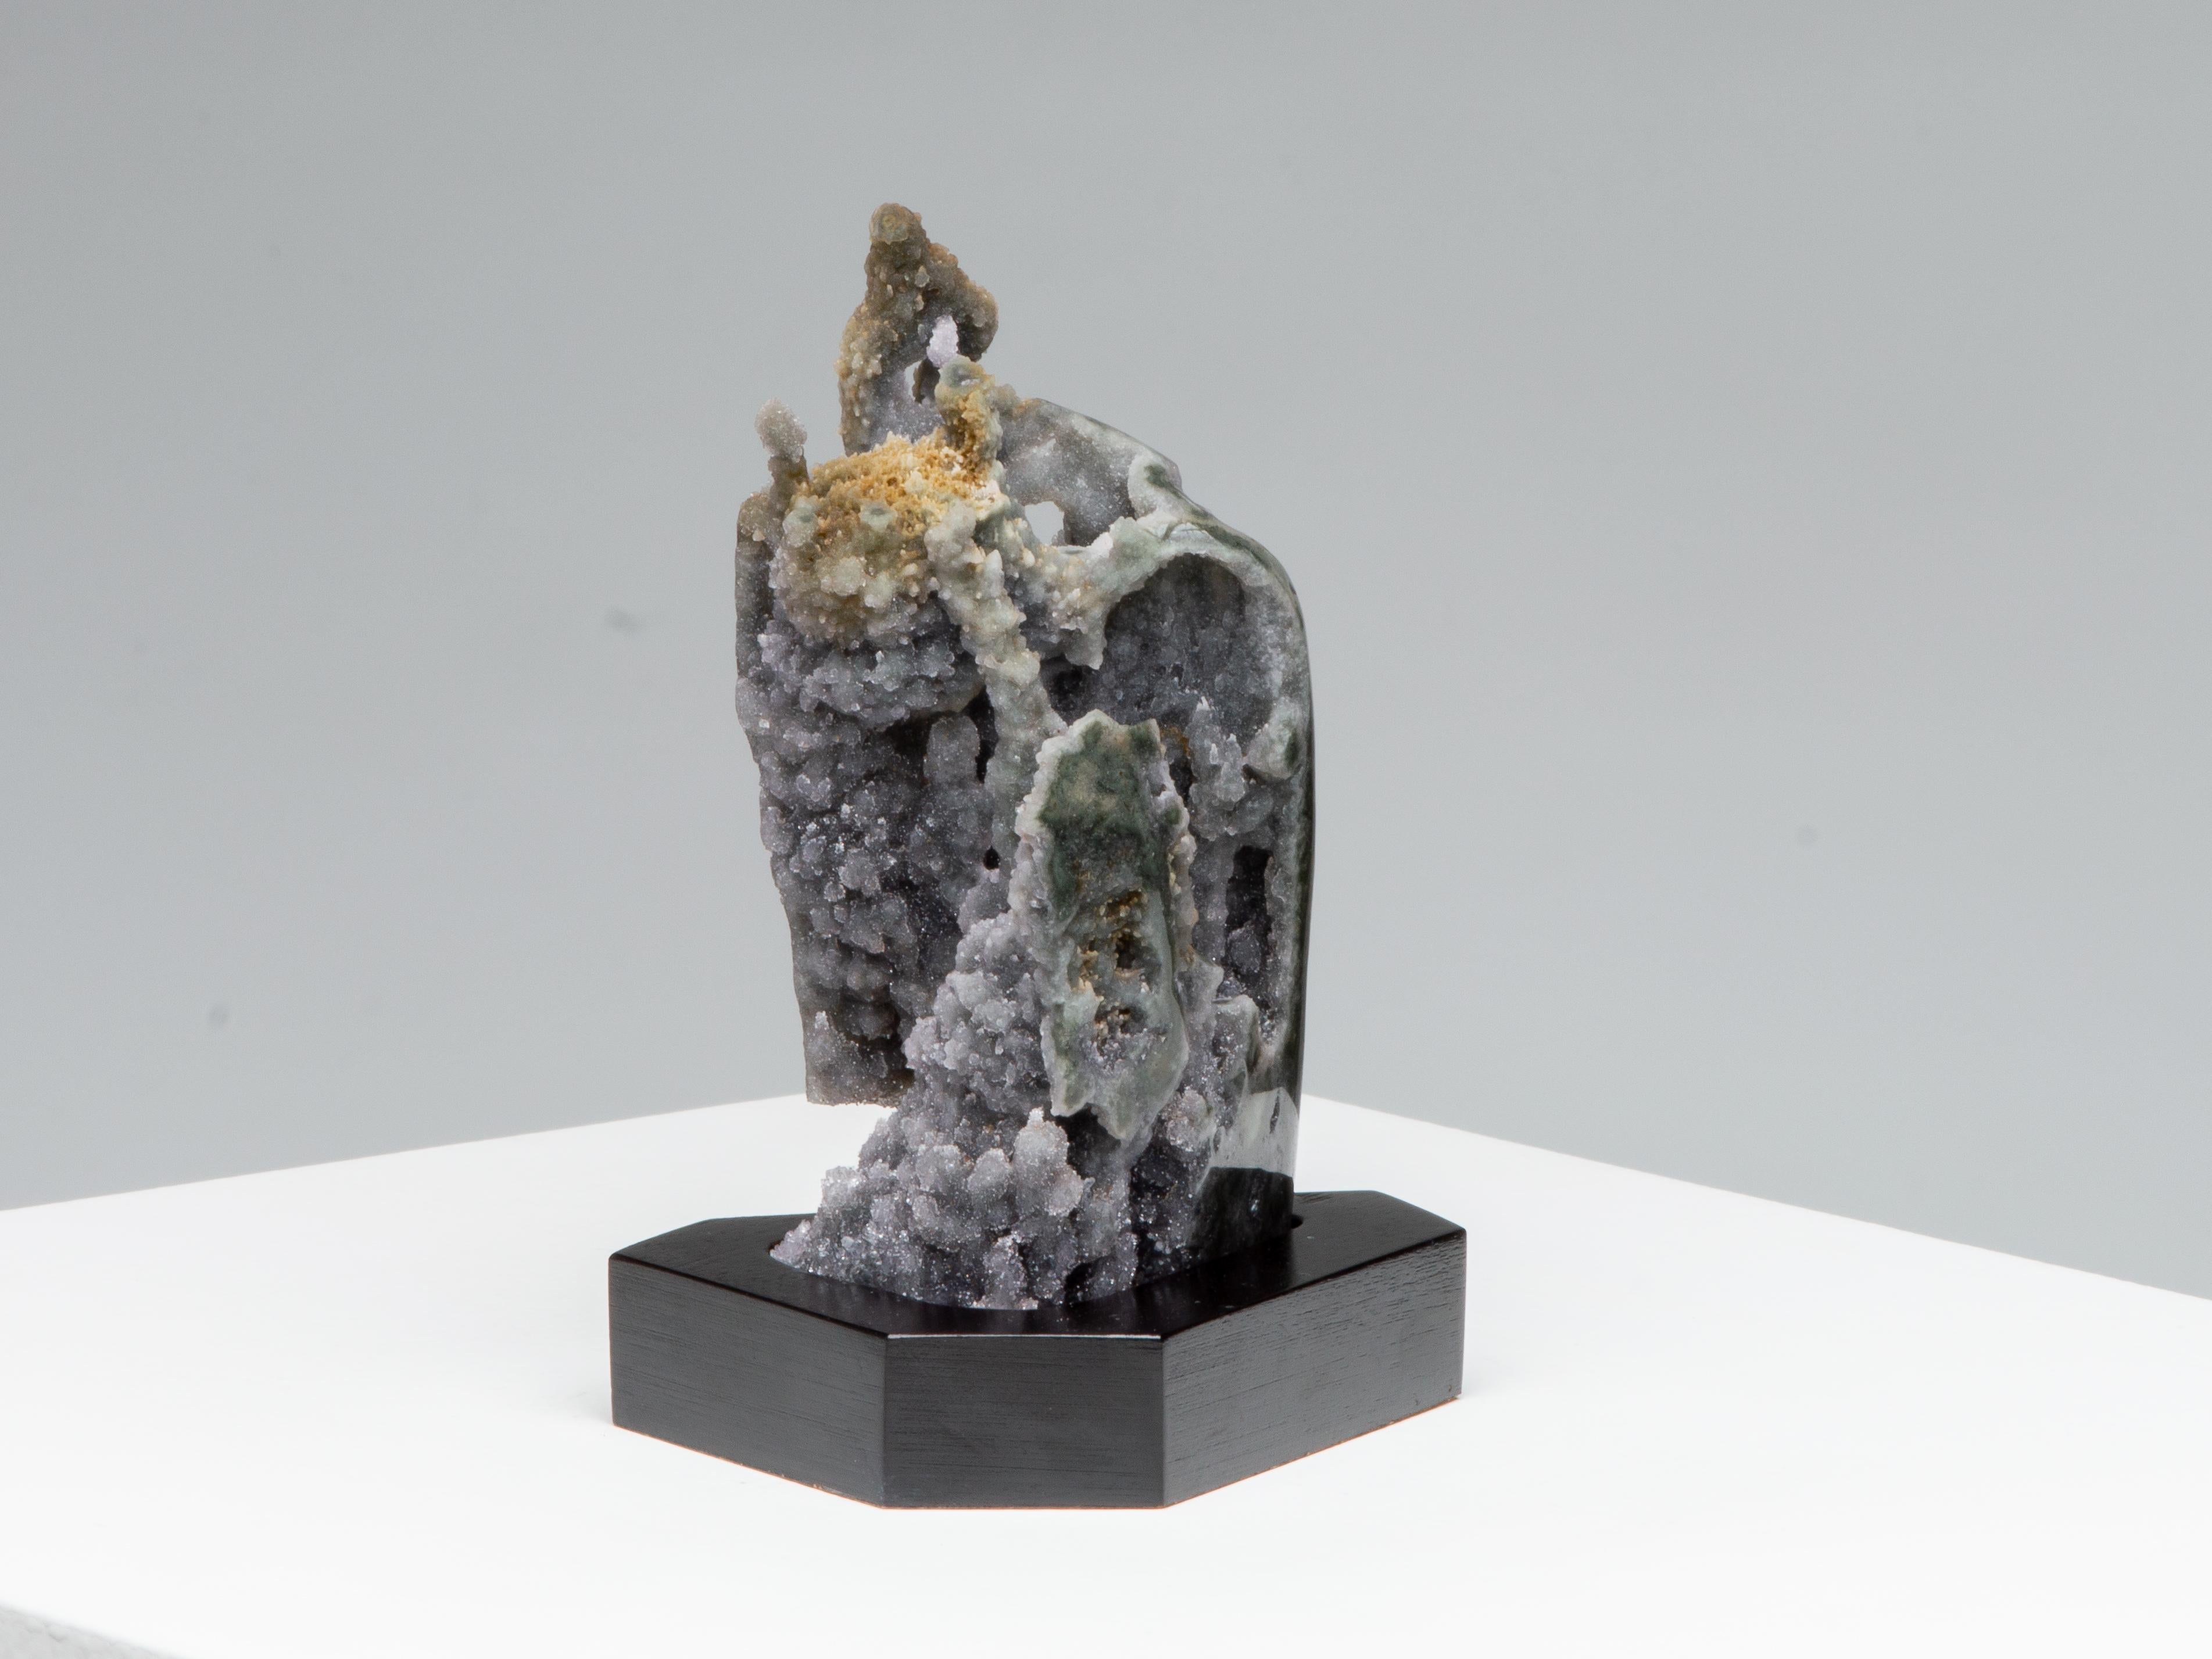 This small towering stalactite formation is covered in grey druze with tanbrown
accents and transparent quartz overlaying green celadonite.

This piece was legally and ethically sourced directly in the prestigious mines of Uruguay, South America.